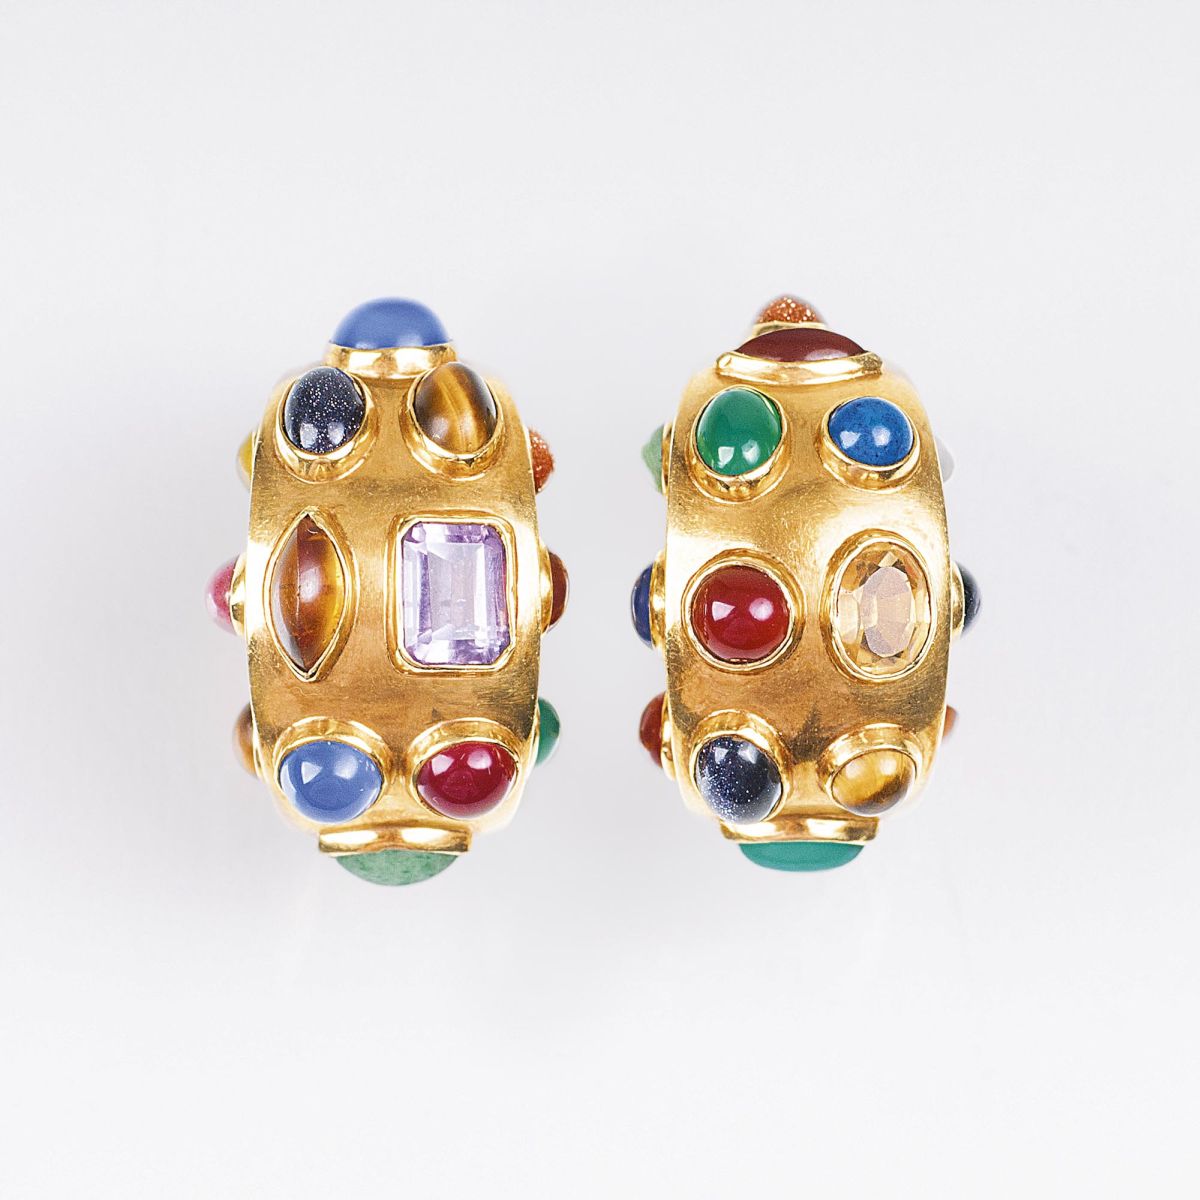 A Pair of Vintage Gold Earrings with coloured Stones by Sanz